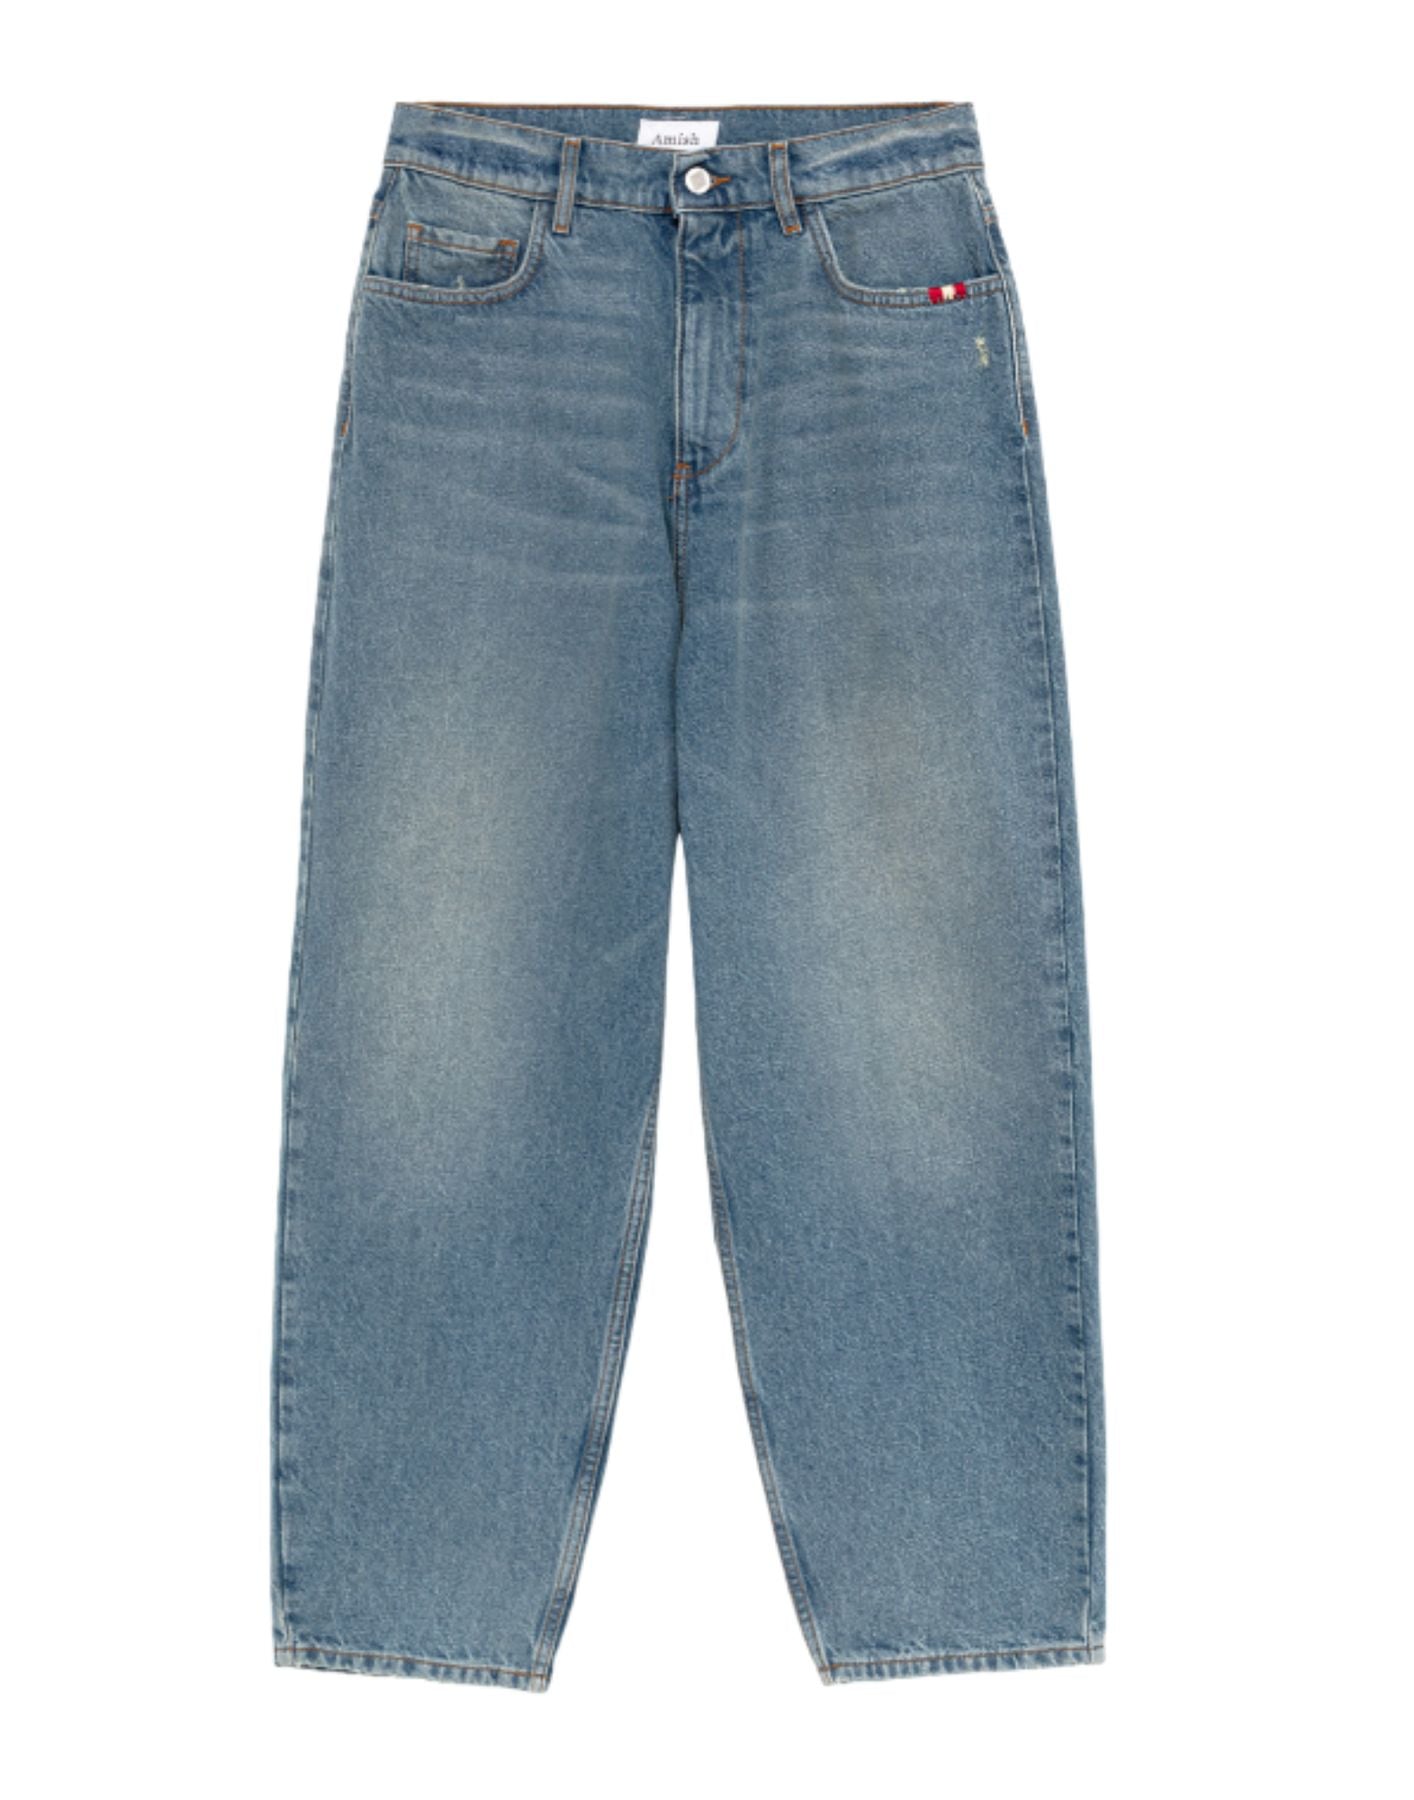 Jeans woman AMD047D4691772 REAL VINTAGE Amish